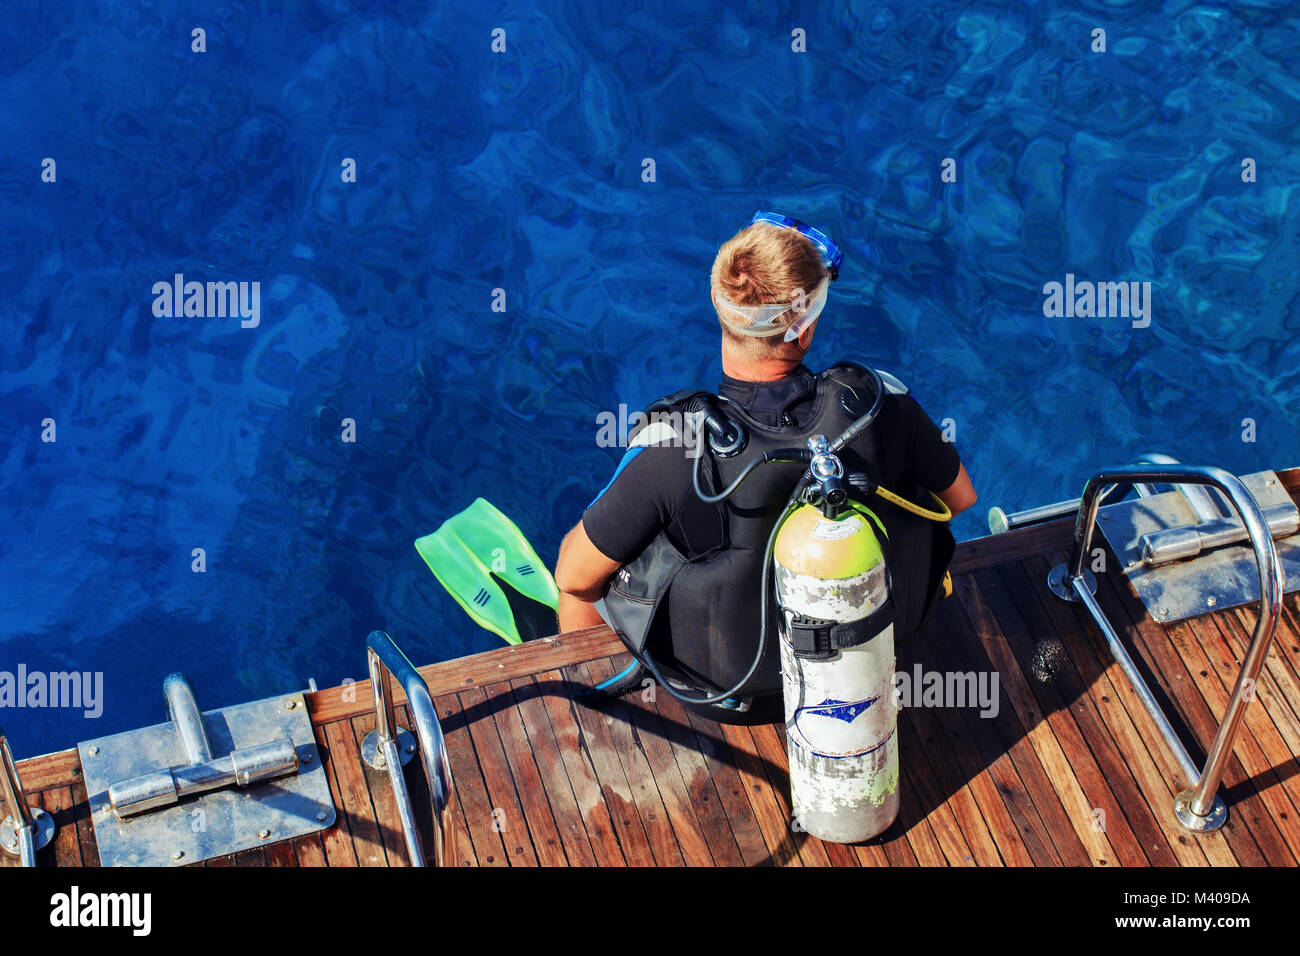 Sharma Sheikh, Egypt, October 22, 2017: A diving lesson in open water. Stock Photo